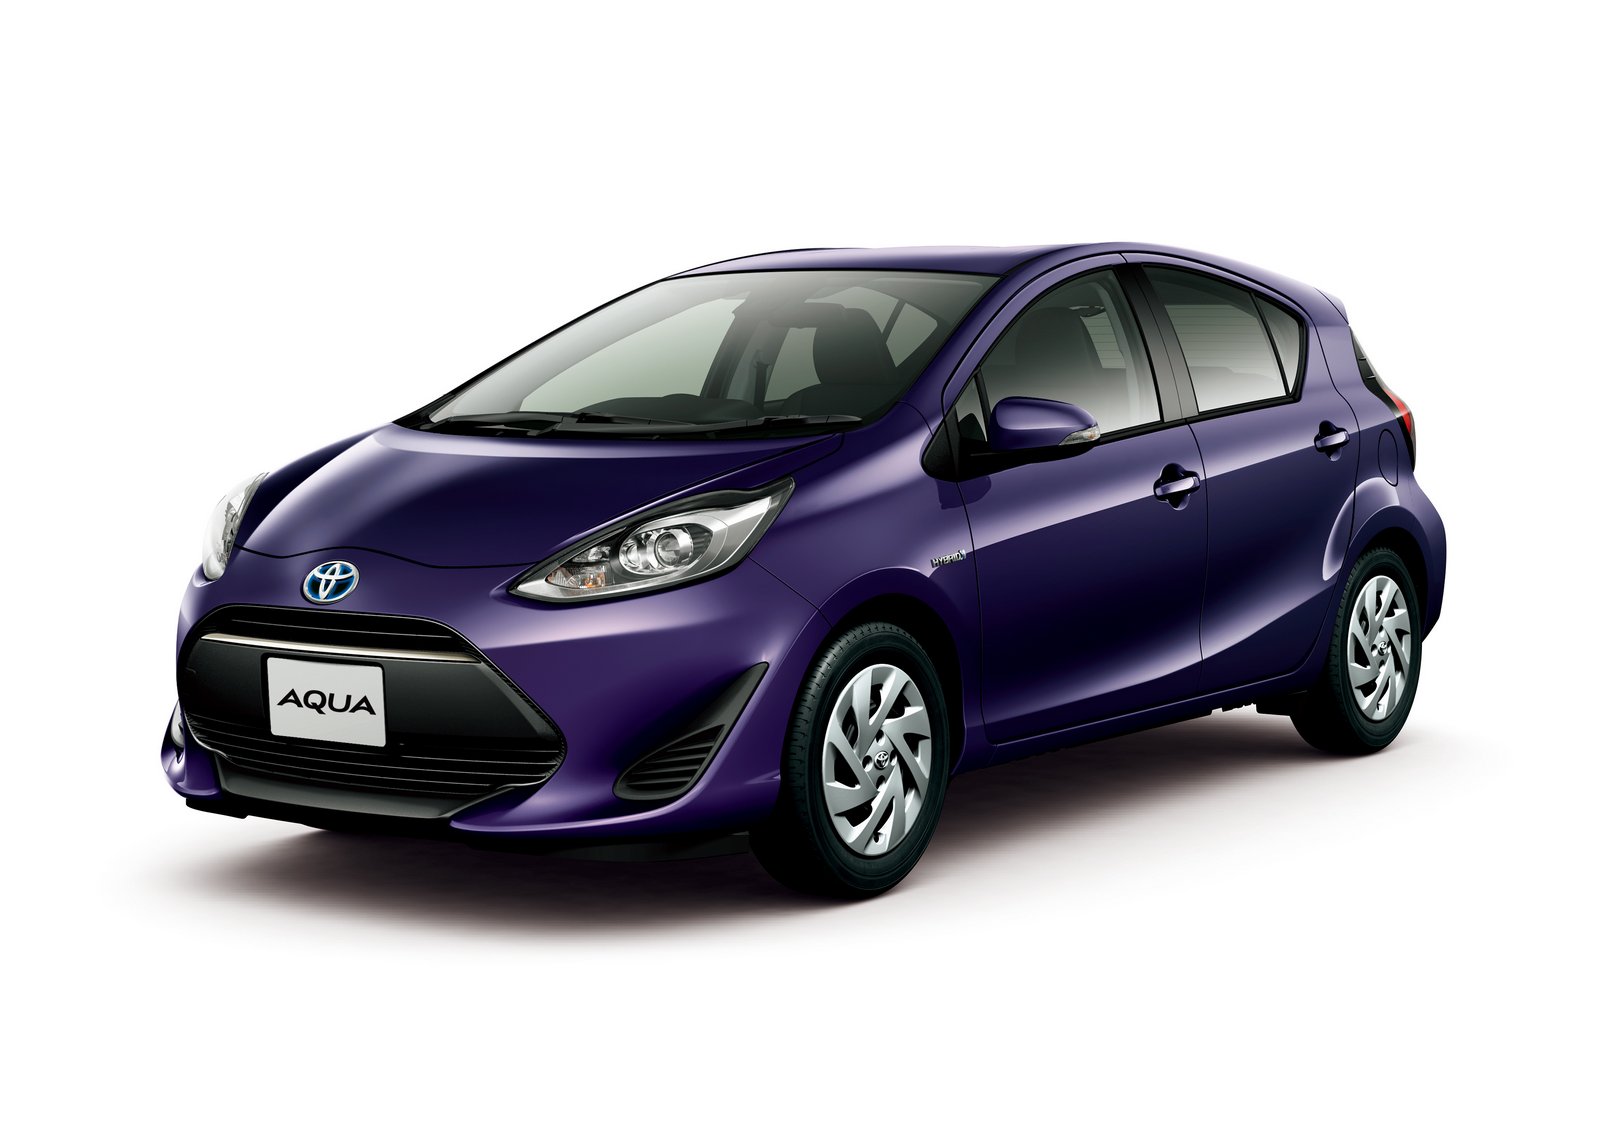 Toyota Aqua Aka The Prius C Gets A Facelift And A New Crossover Variant Carscoops